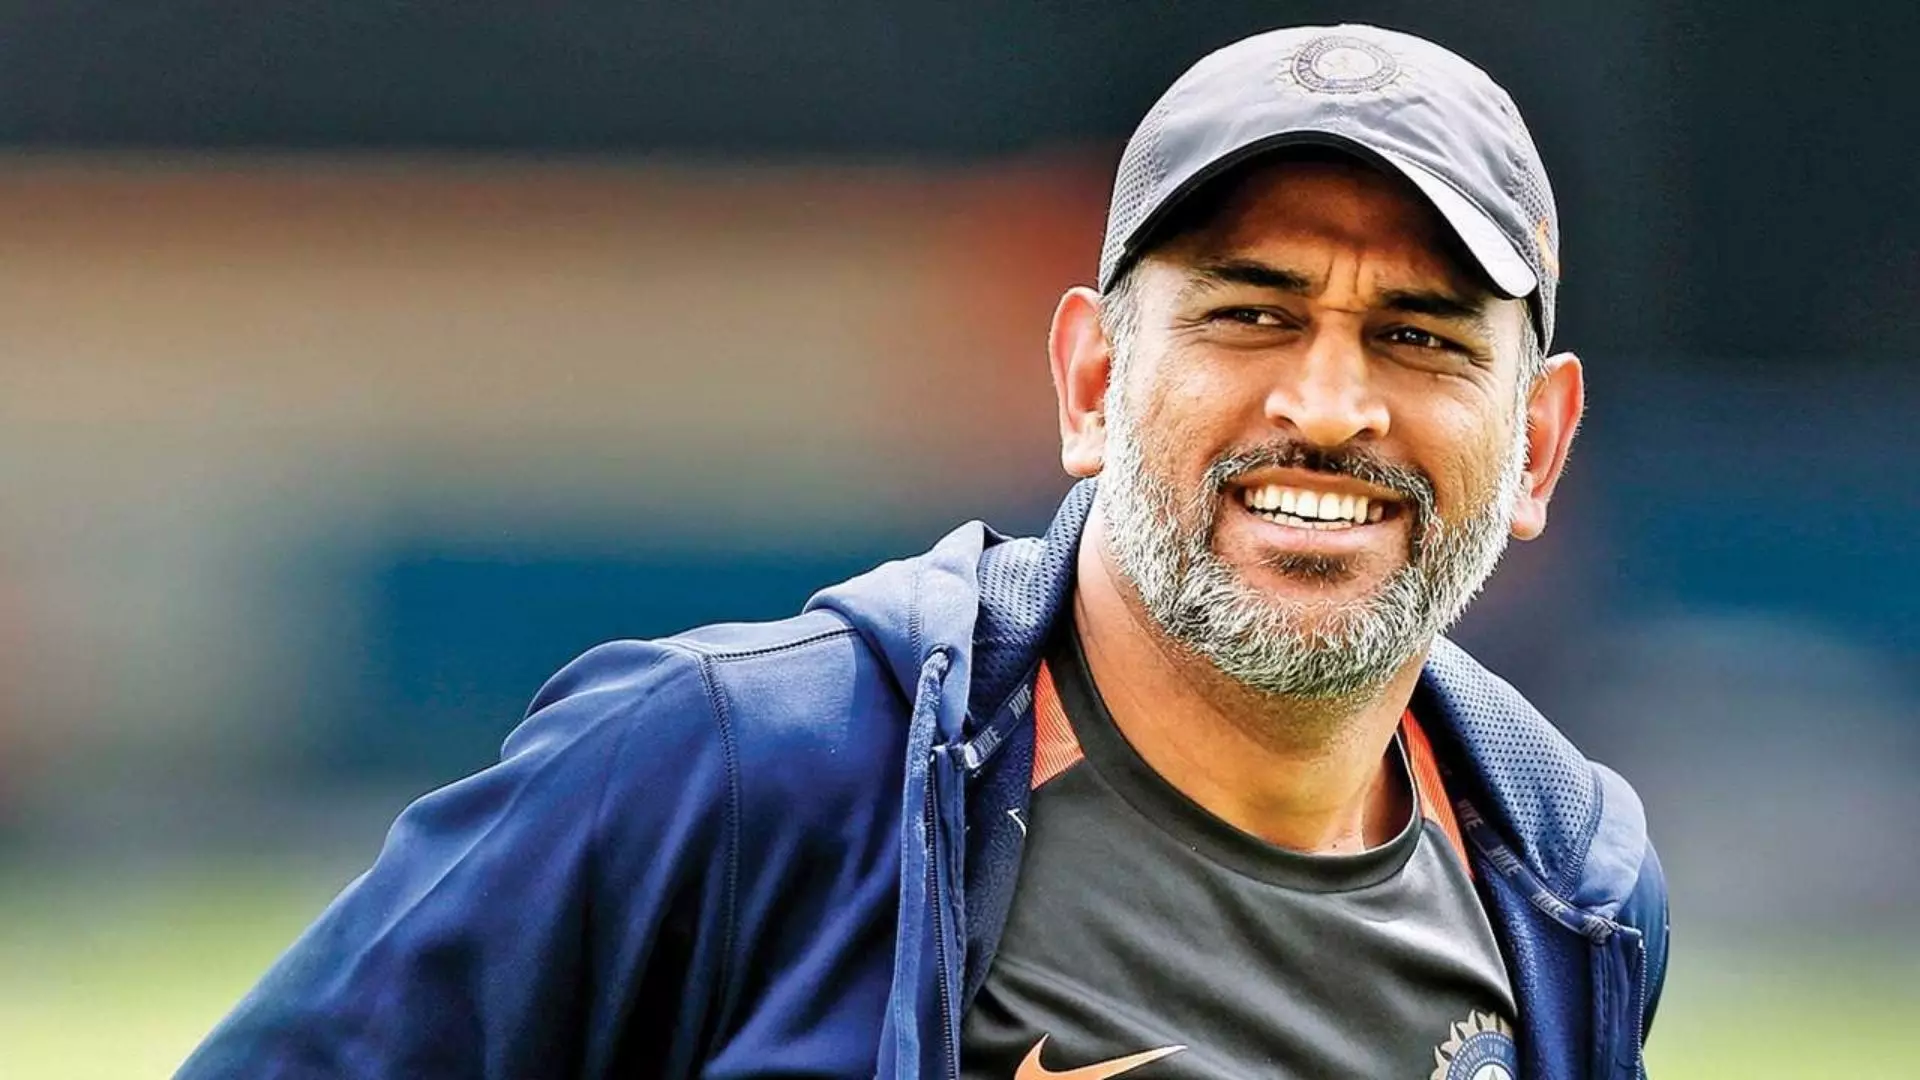 BCCI Secretary Jai Shah Says MS Dhoni Will Work Team India Mentor For Free